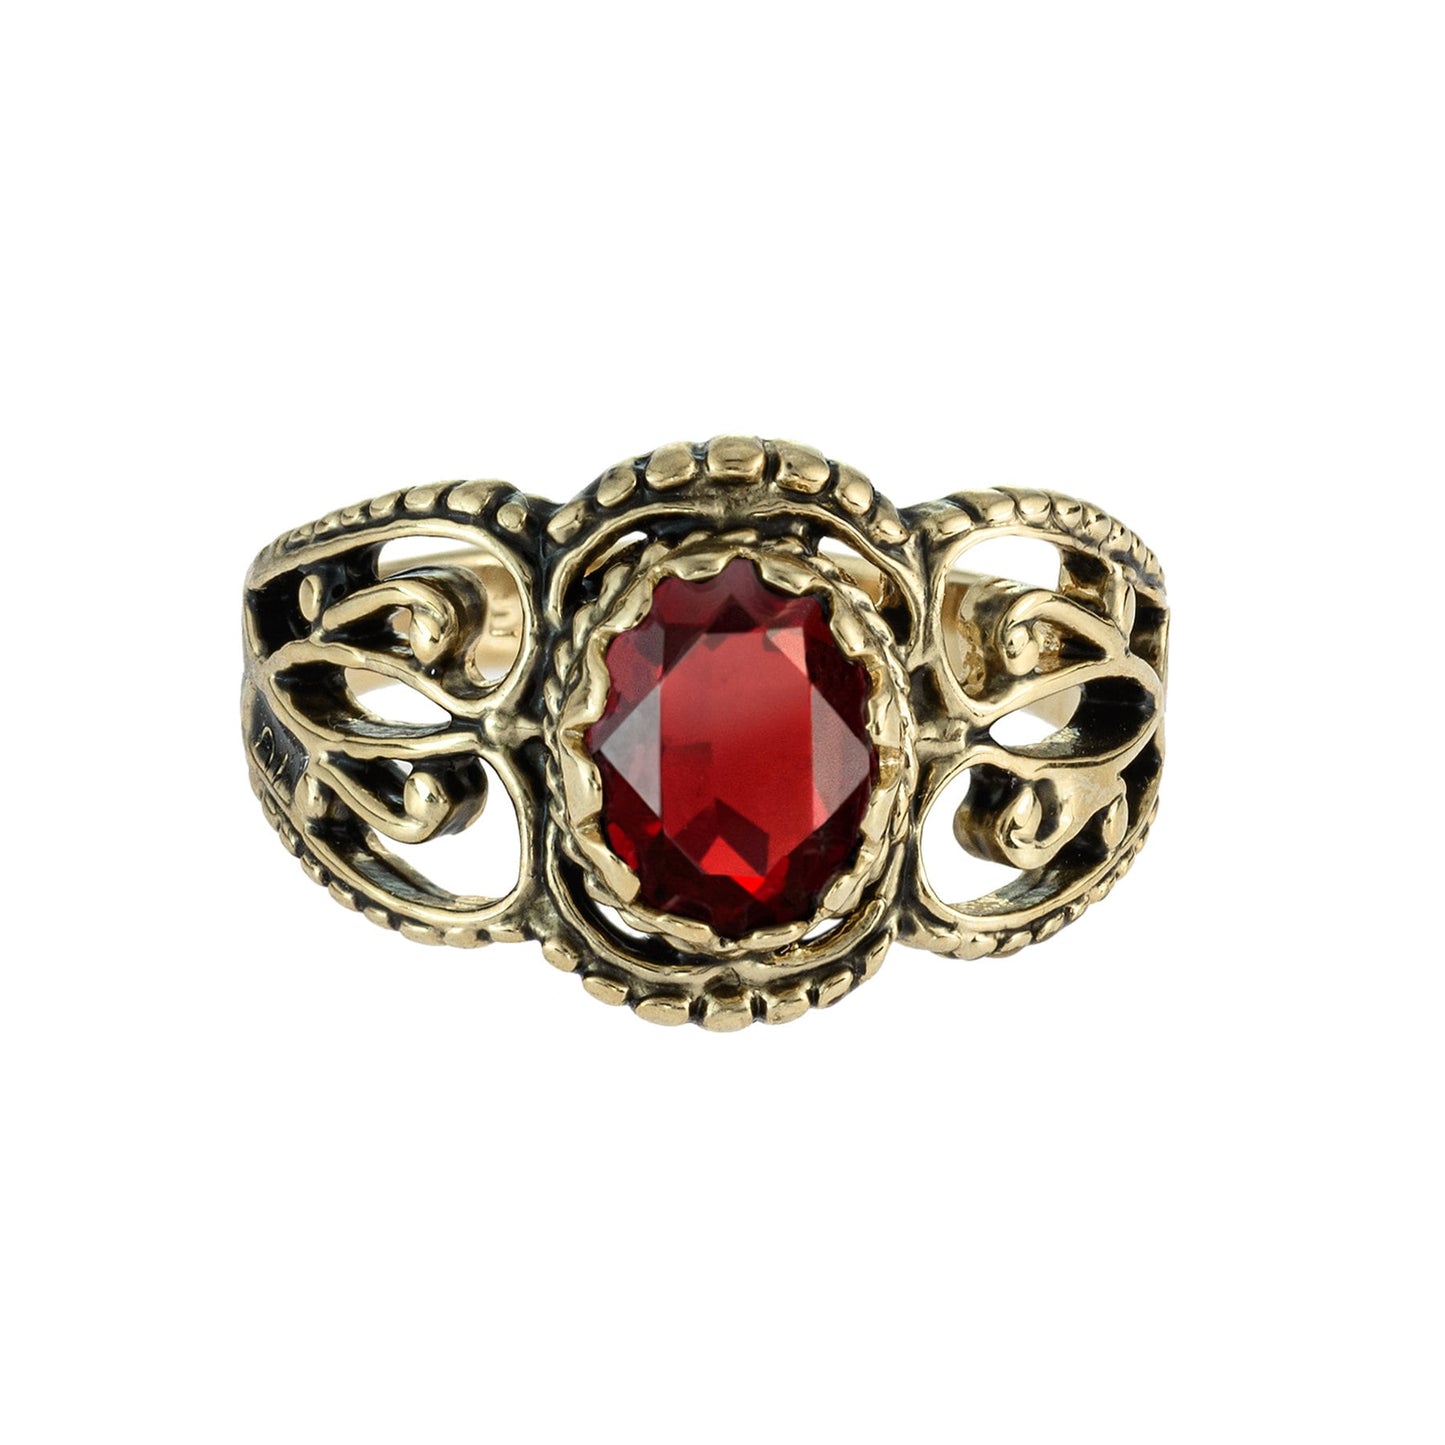 Vintage Ring Ruby Crystal Filigree Ring Antique 18k Gold  R142 - Limited Stock - Never Worn